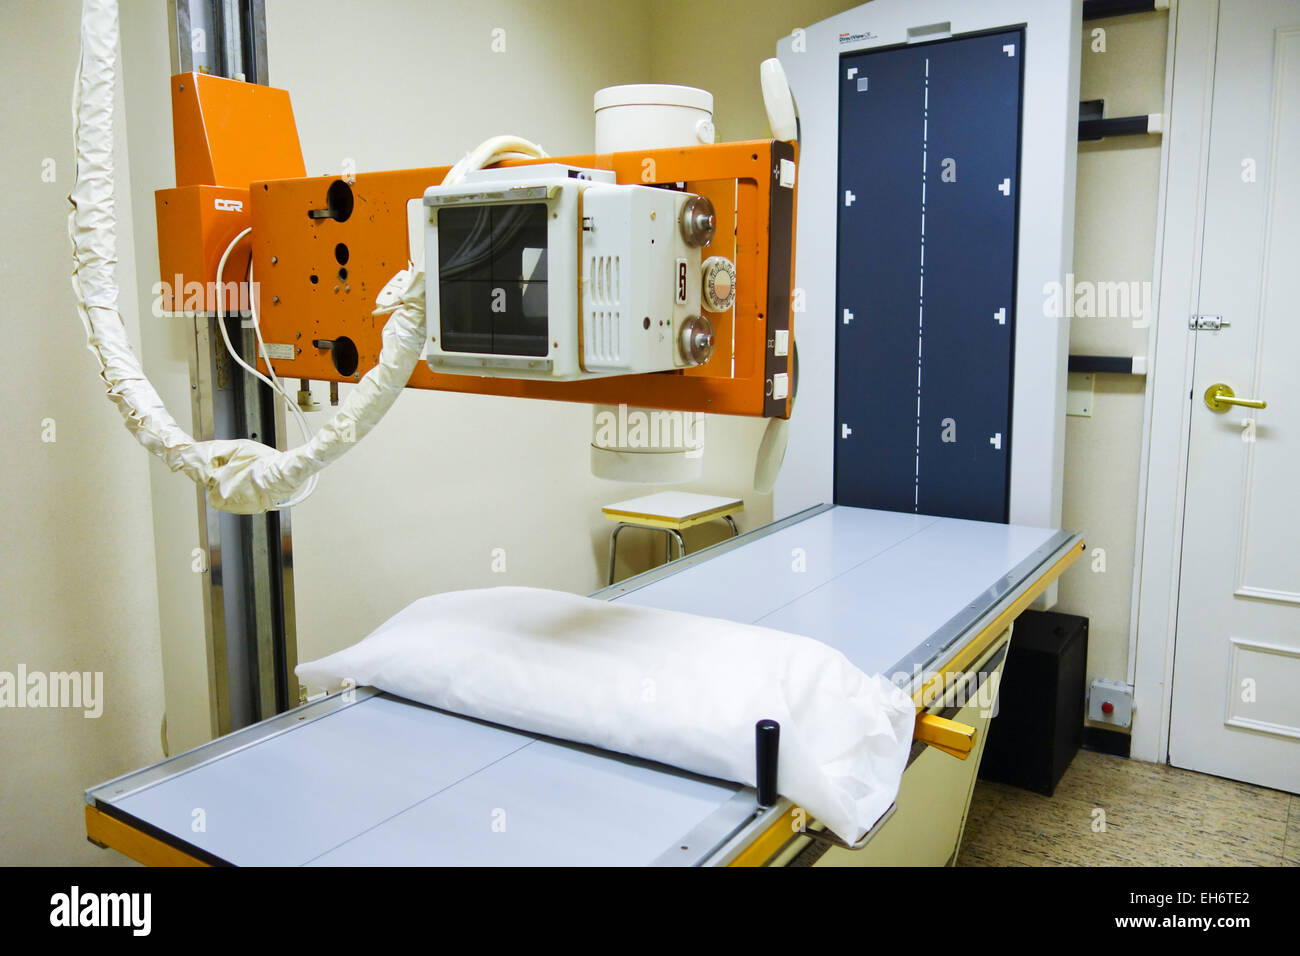 A Radiology room table with X-ray generator in clinic, Spain. Stock Photo